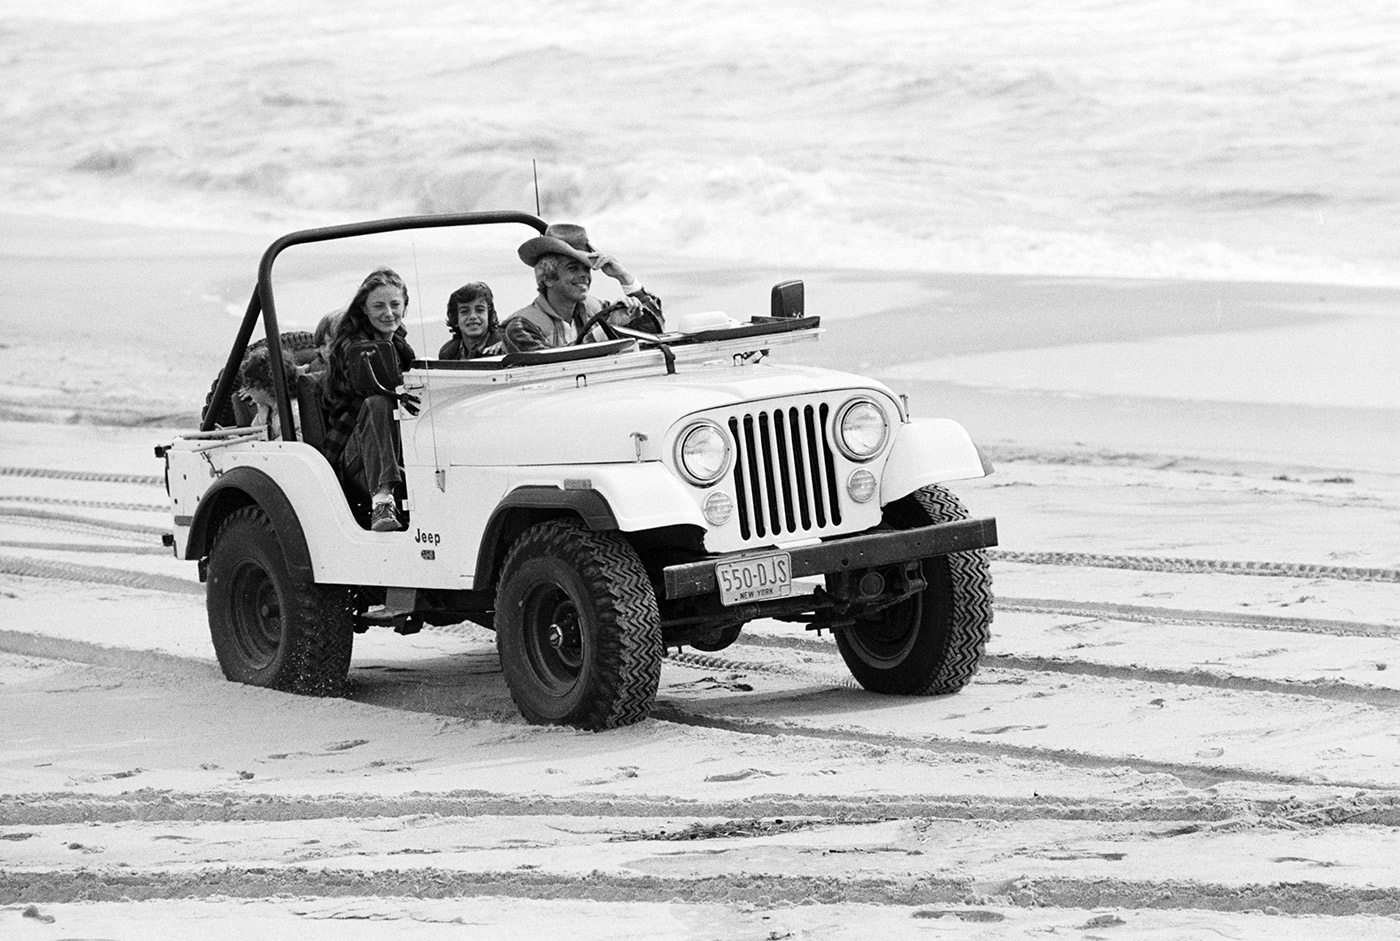  Ralph Lauren and family, making the most of the CJ-5&#x2019;s four-wheel drive, on a beach in East Hampton, in 1977